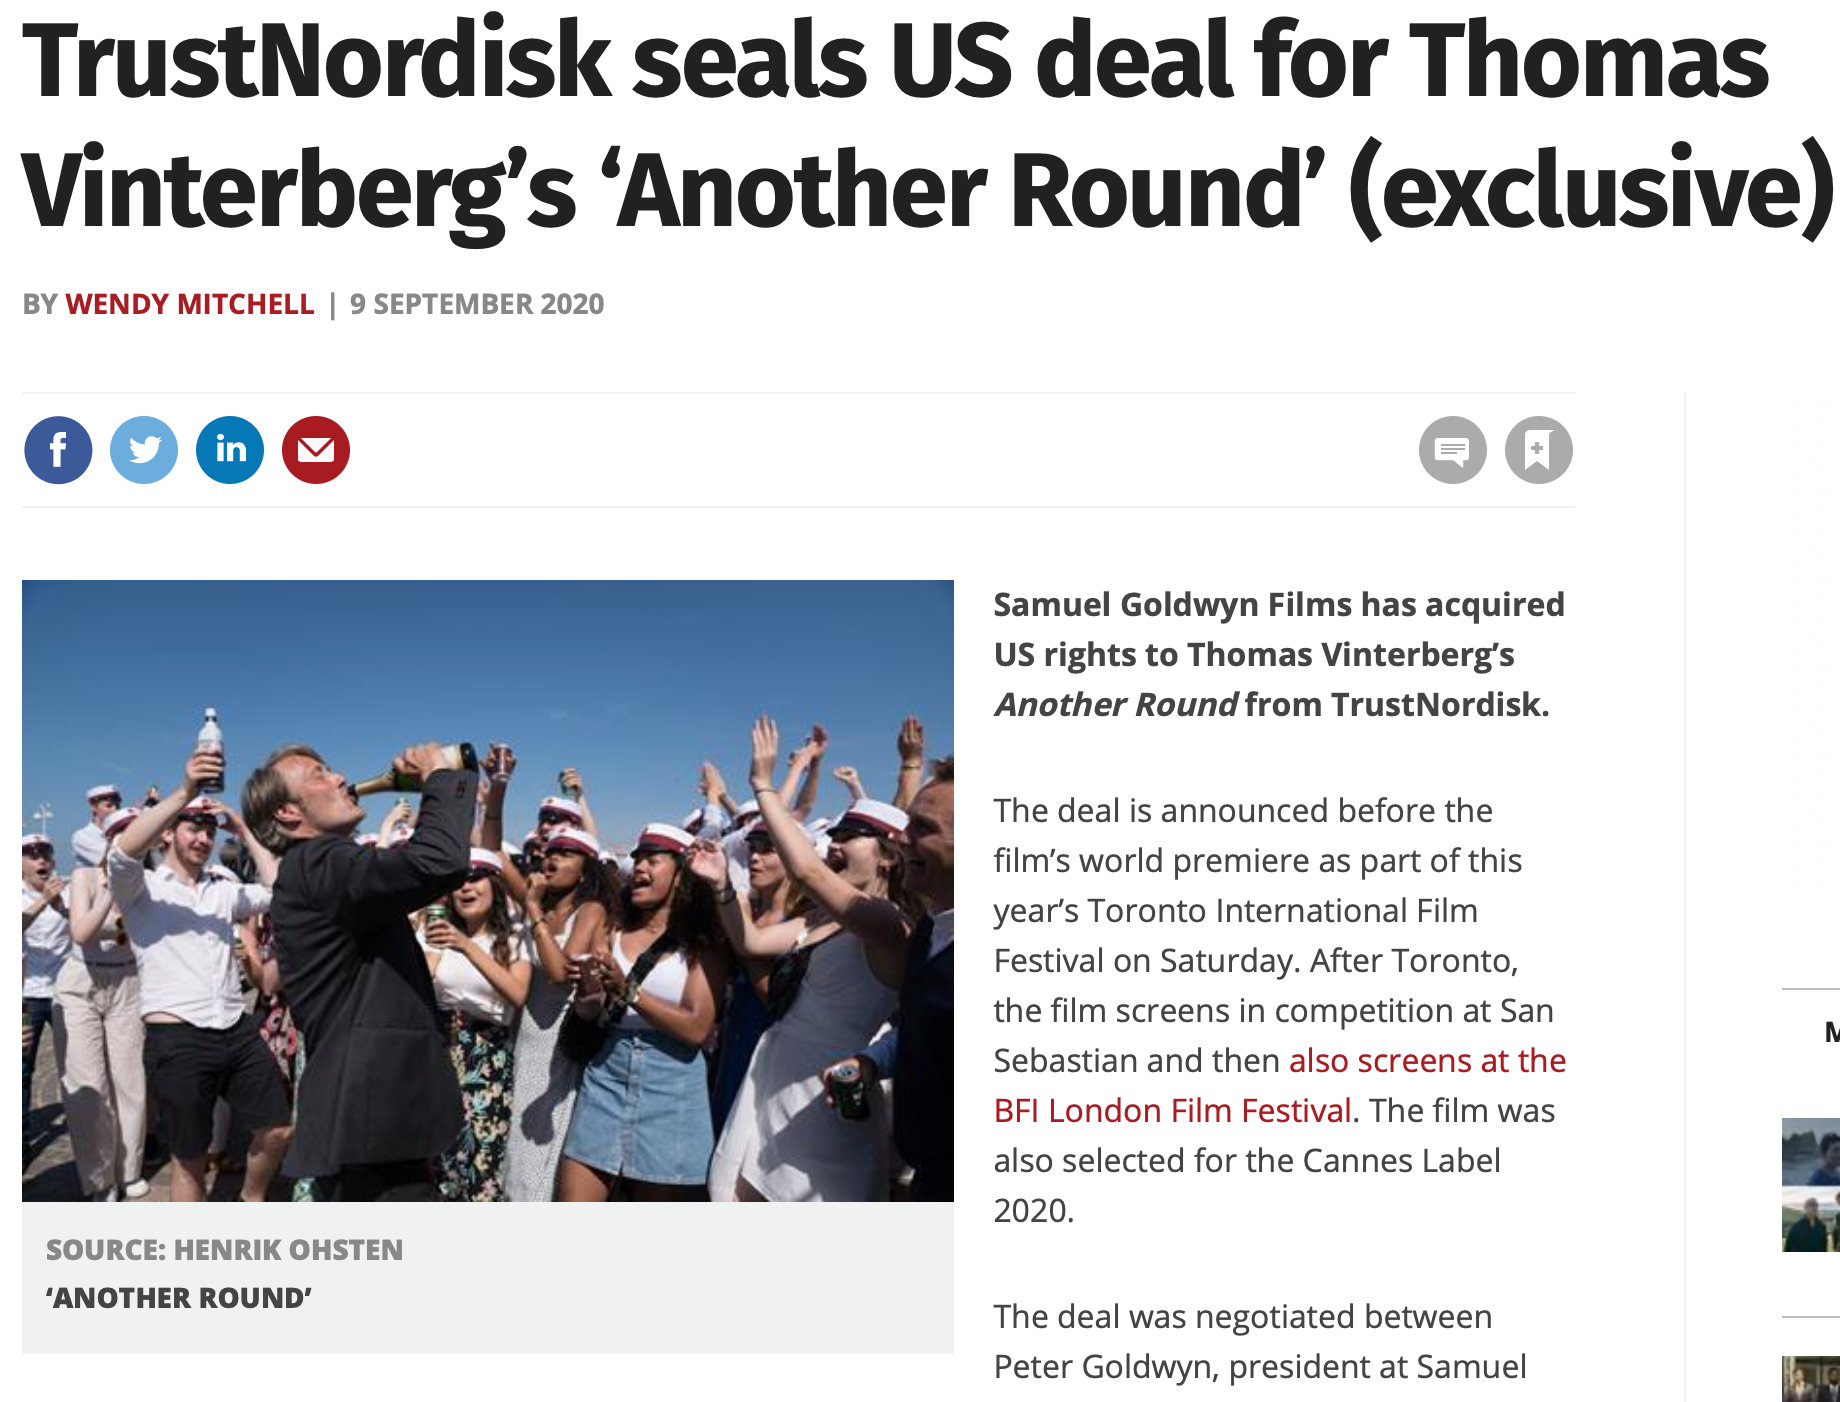 TrustNordisk seals US deal for Thomas Vinterberg’s ‘Another Round’